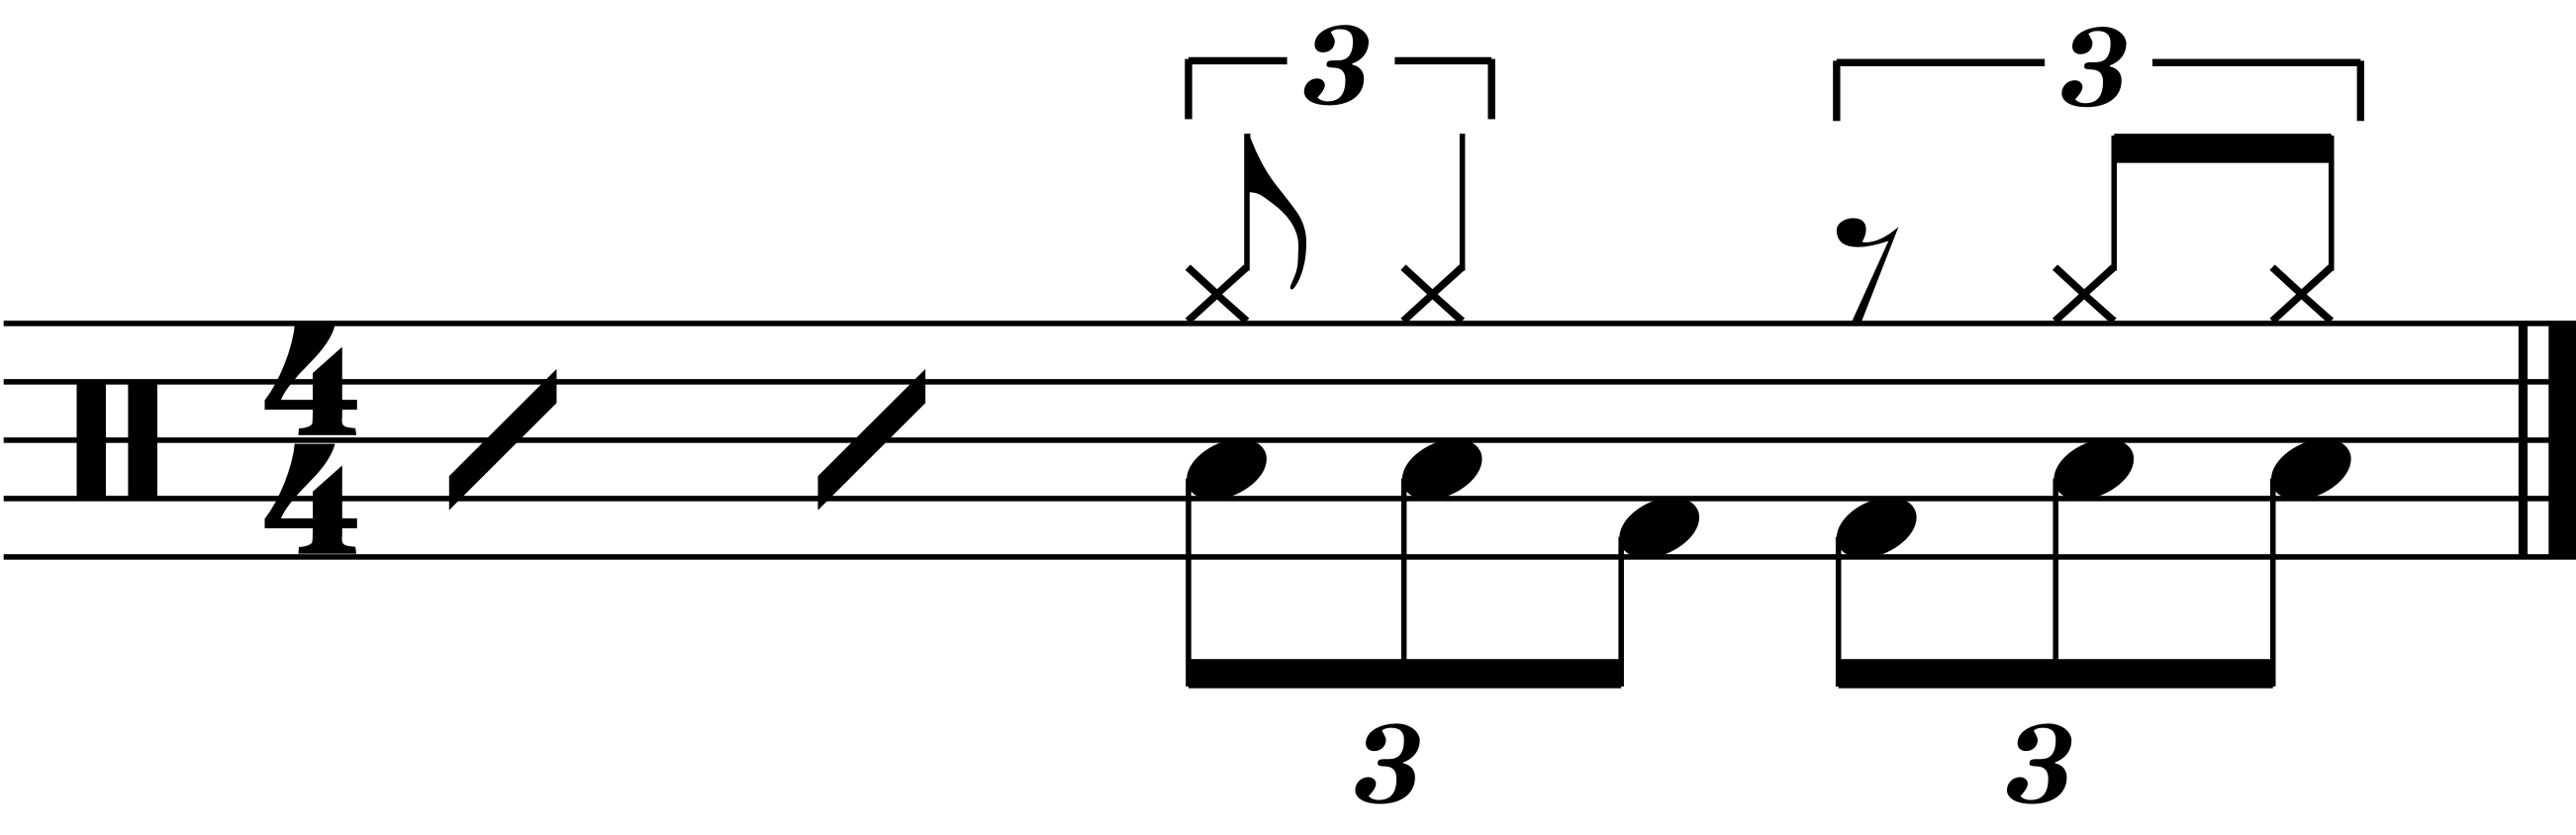 A fill construction example